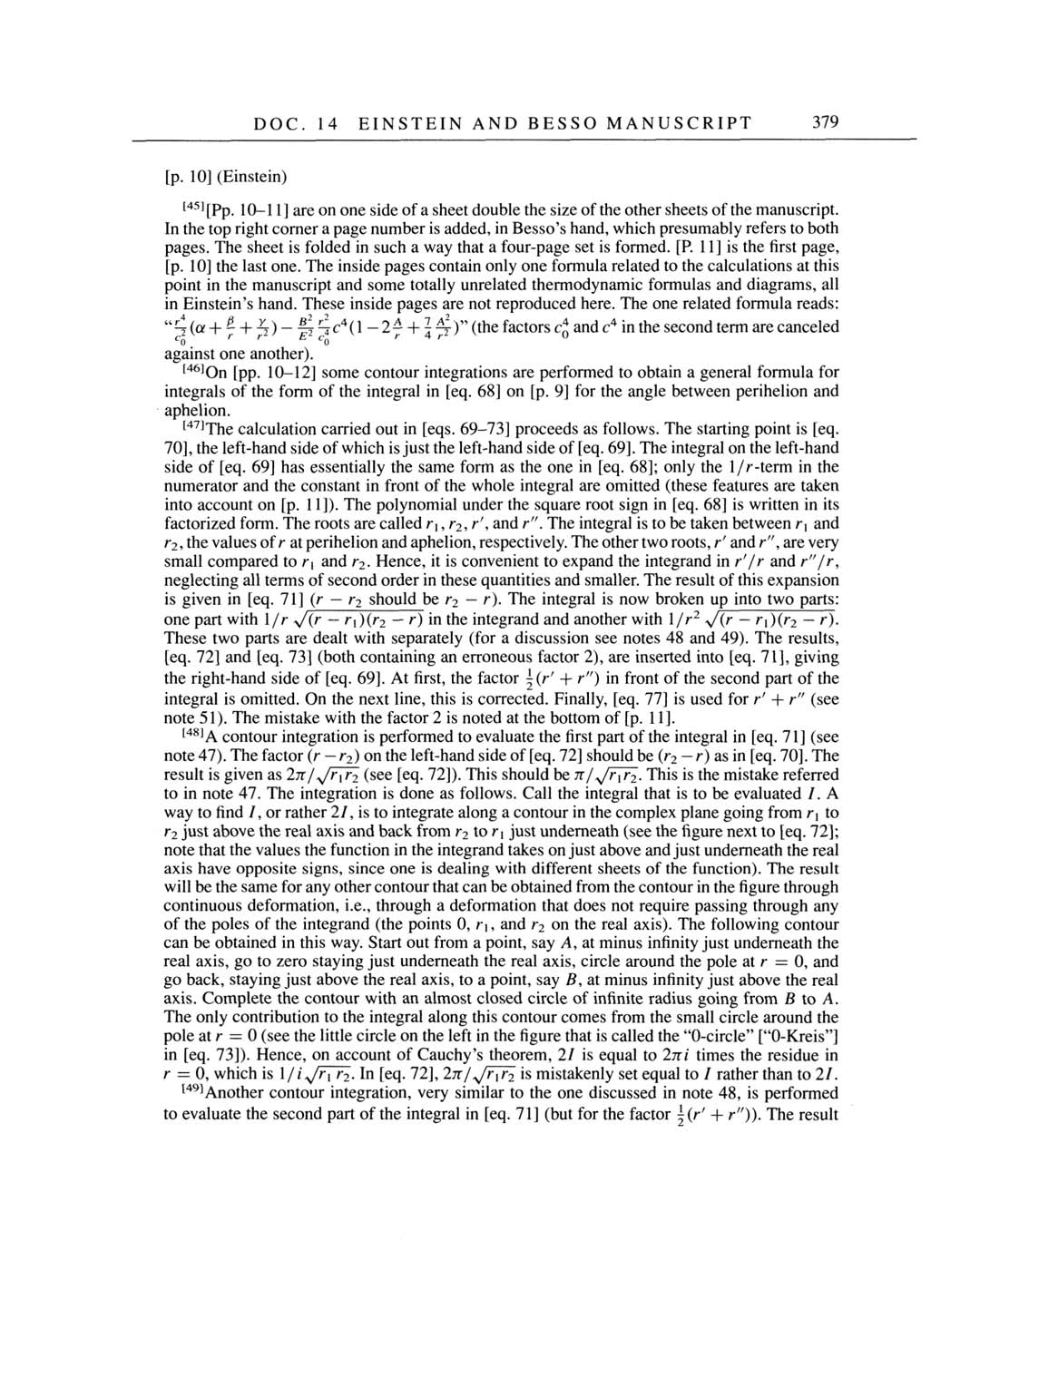 Volume 4: The Swiss Years: Writings 1912-1914 page 379